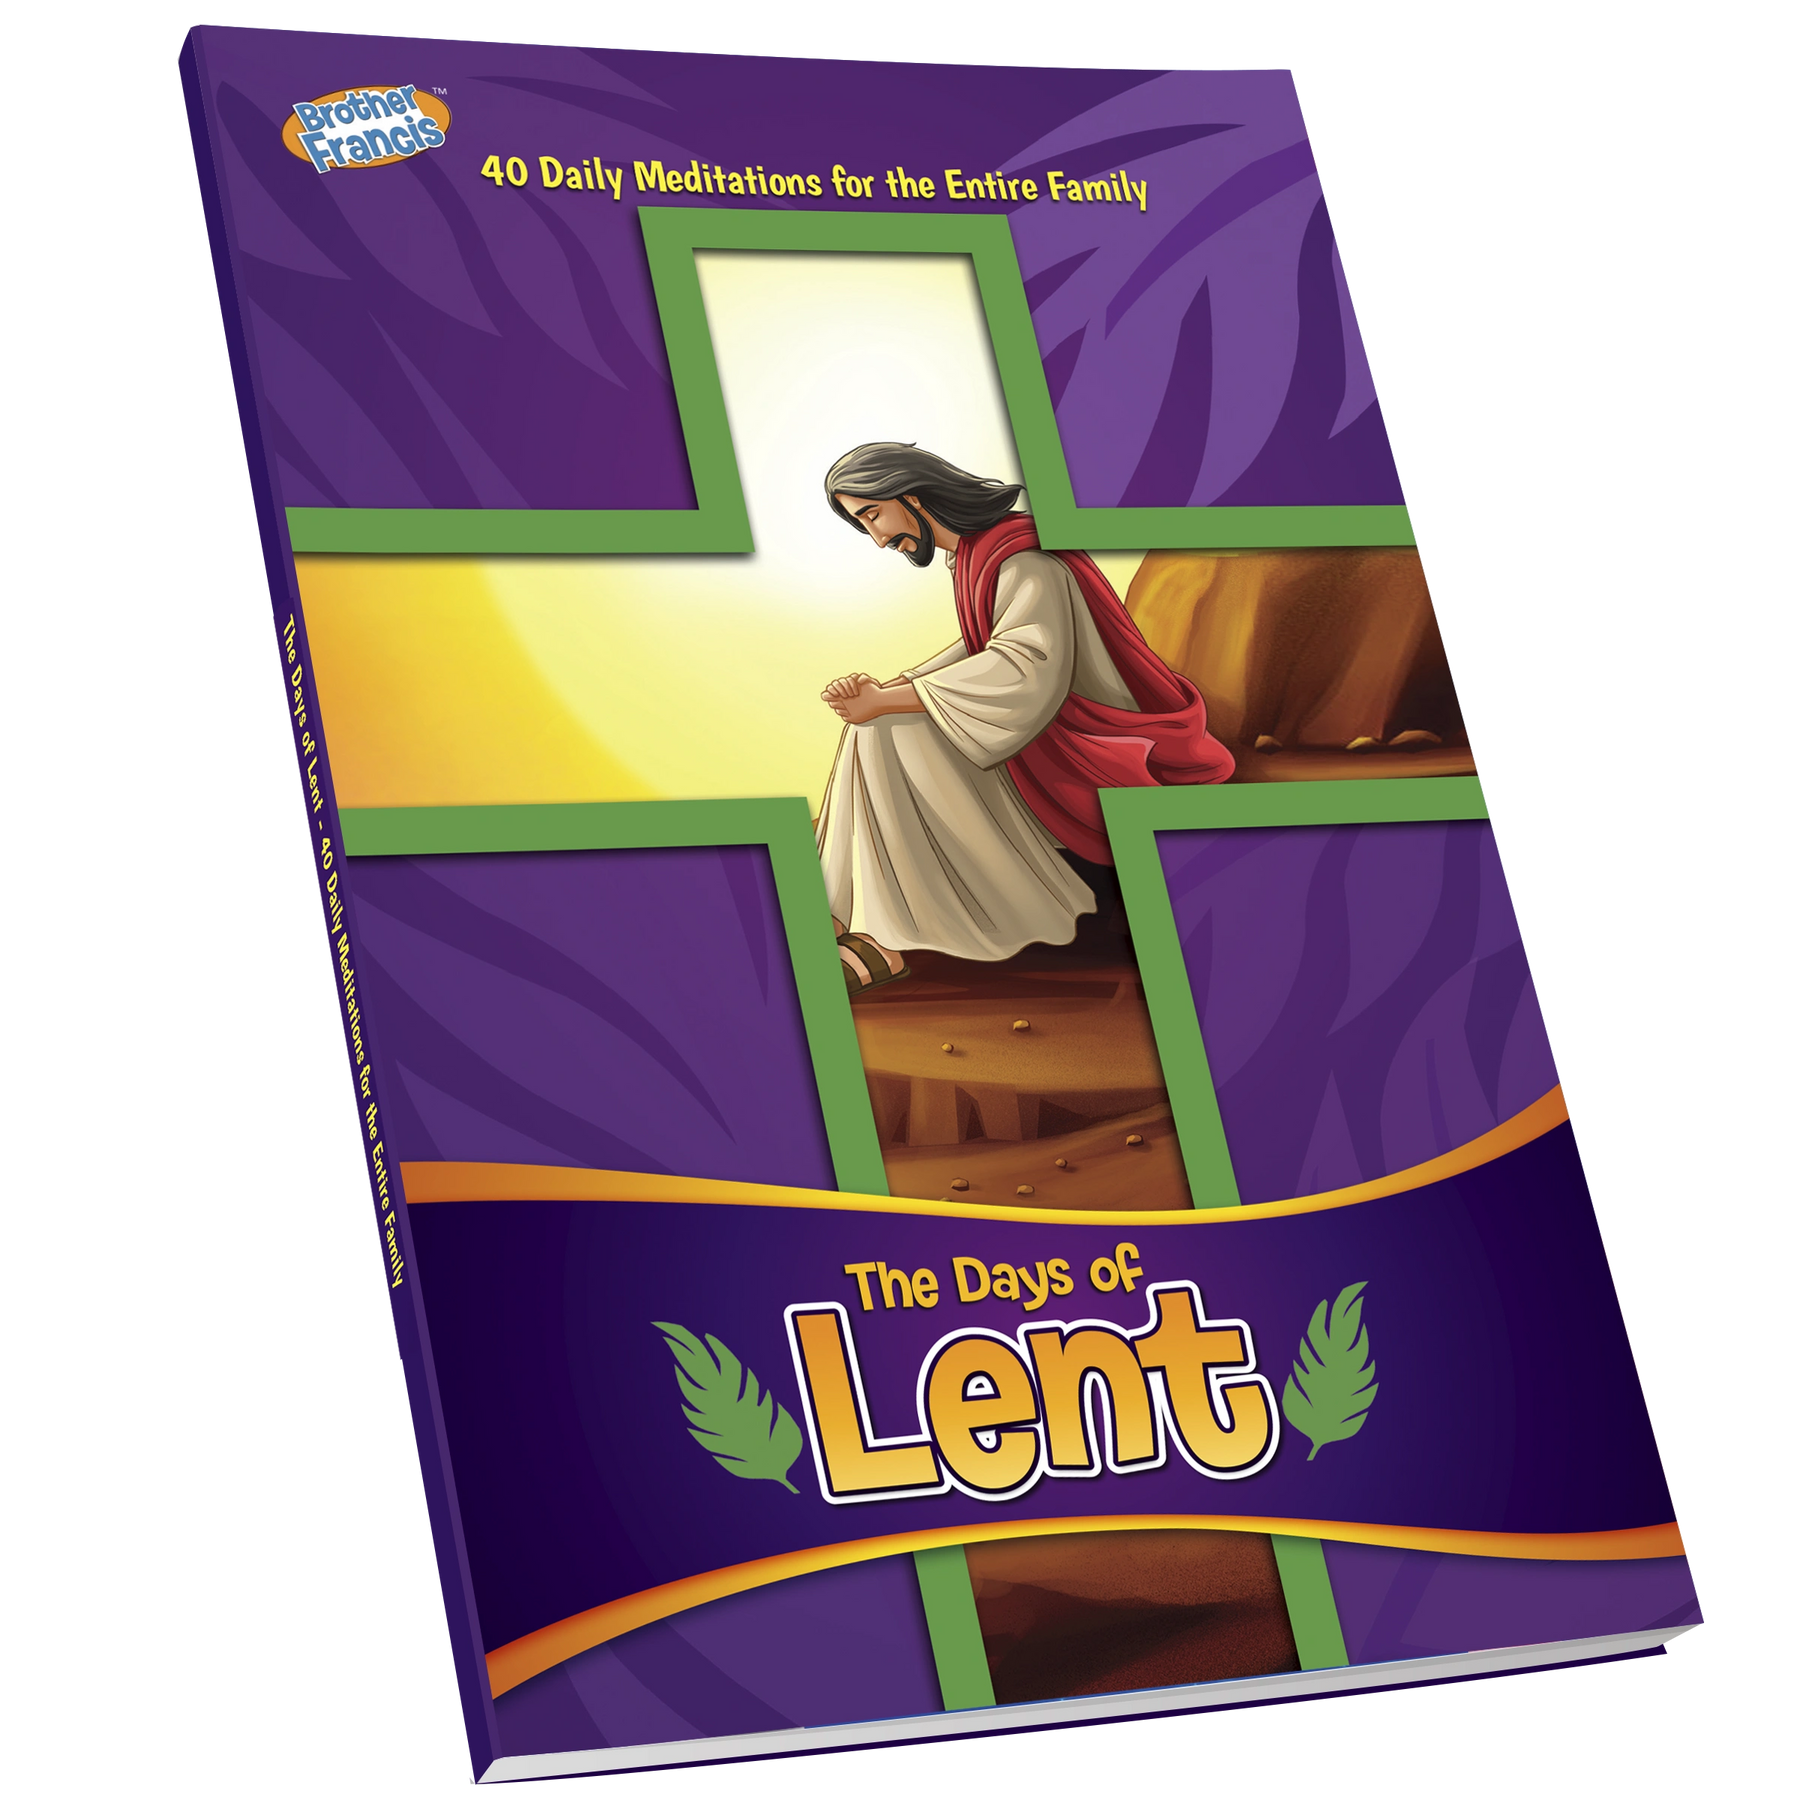 The Days of Lent - Reader